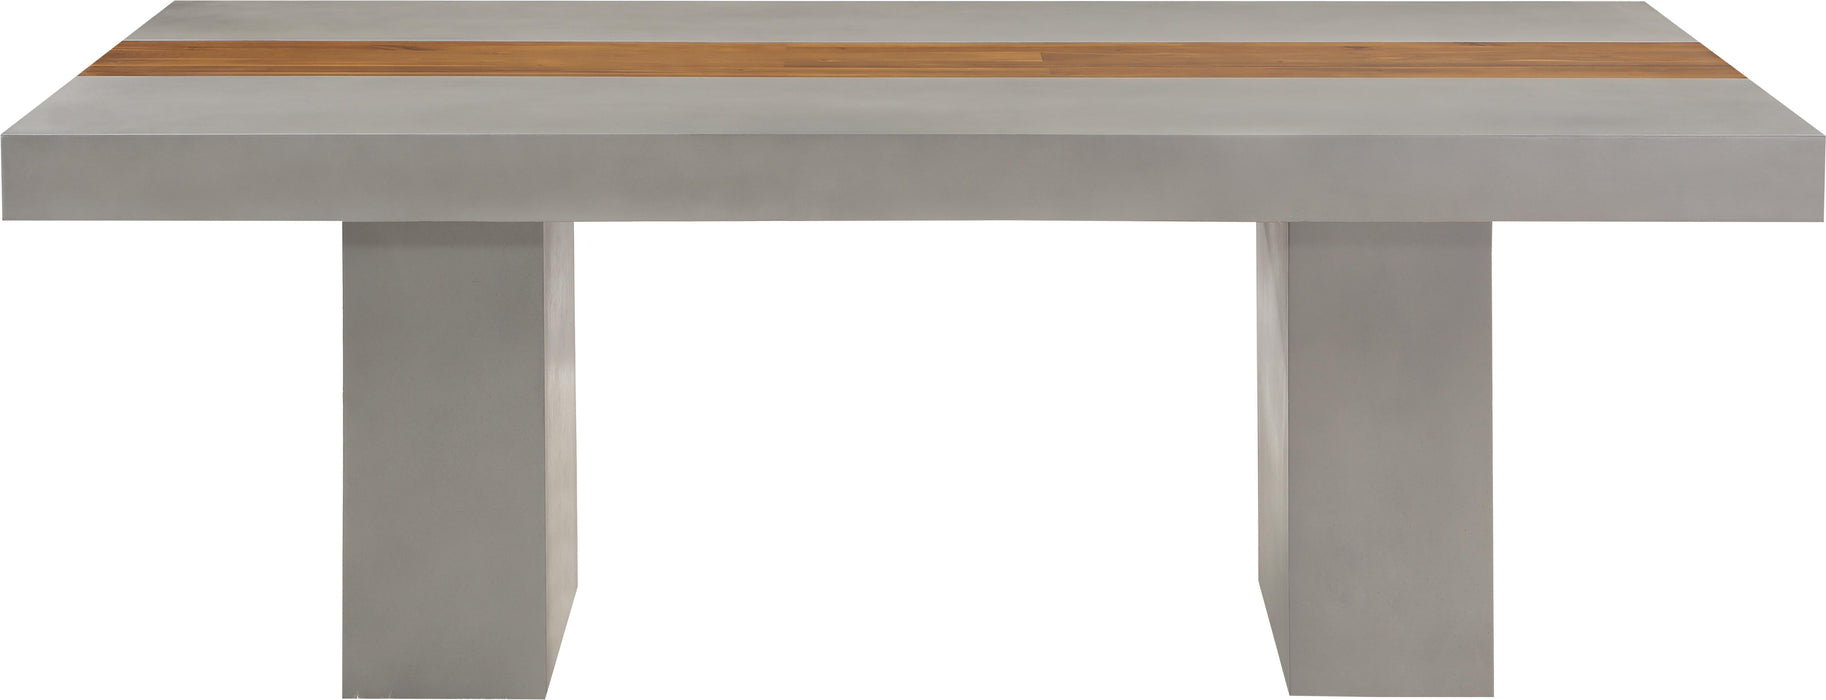 Rio Light Grey Concrete Cement Dining Table (3 Boxes)